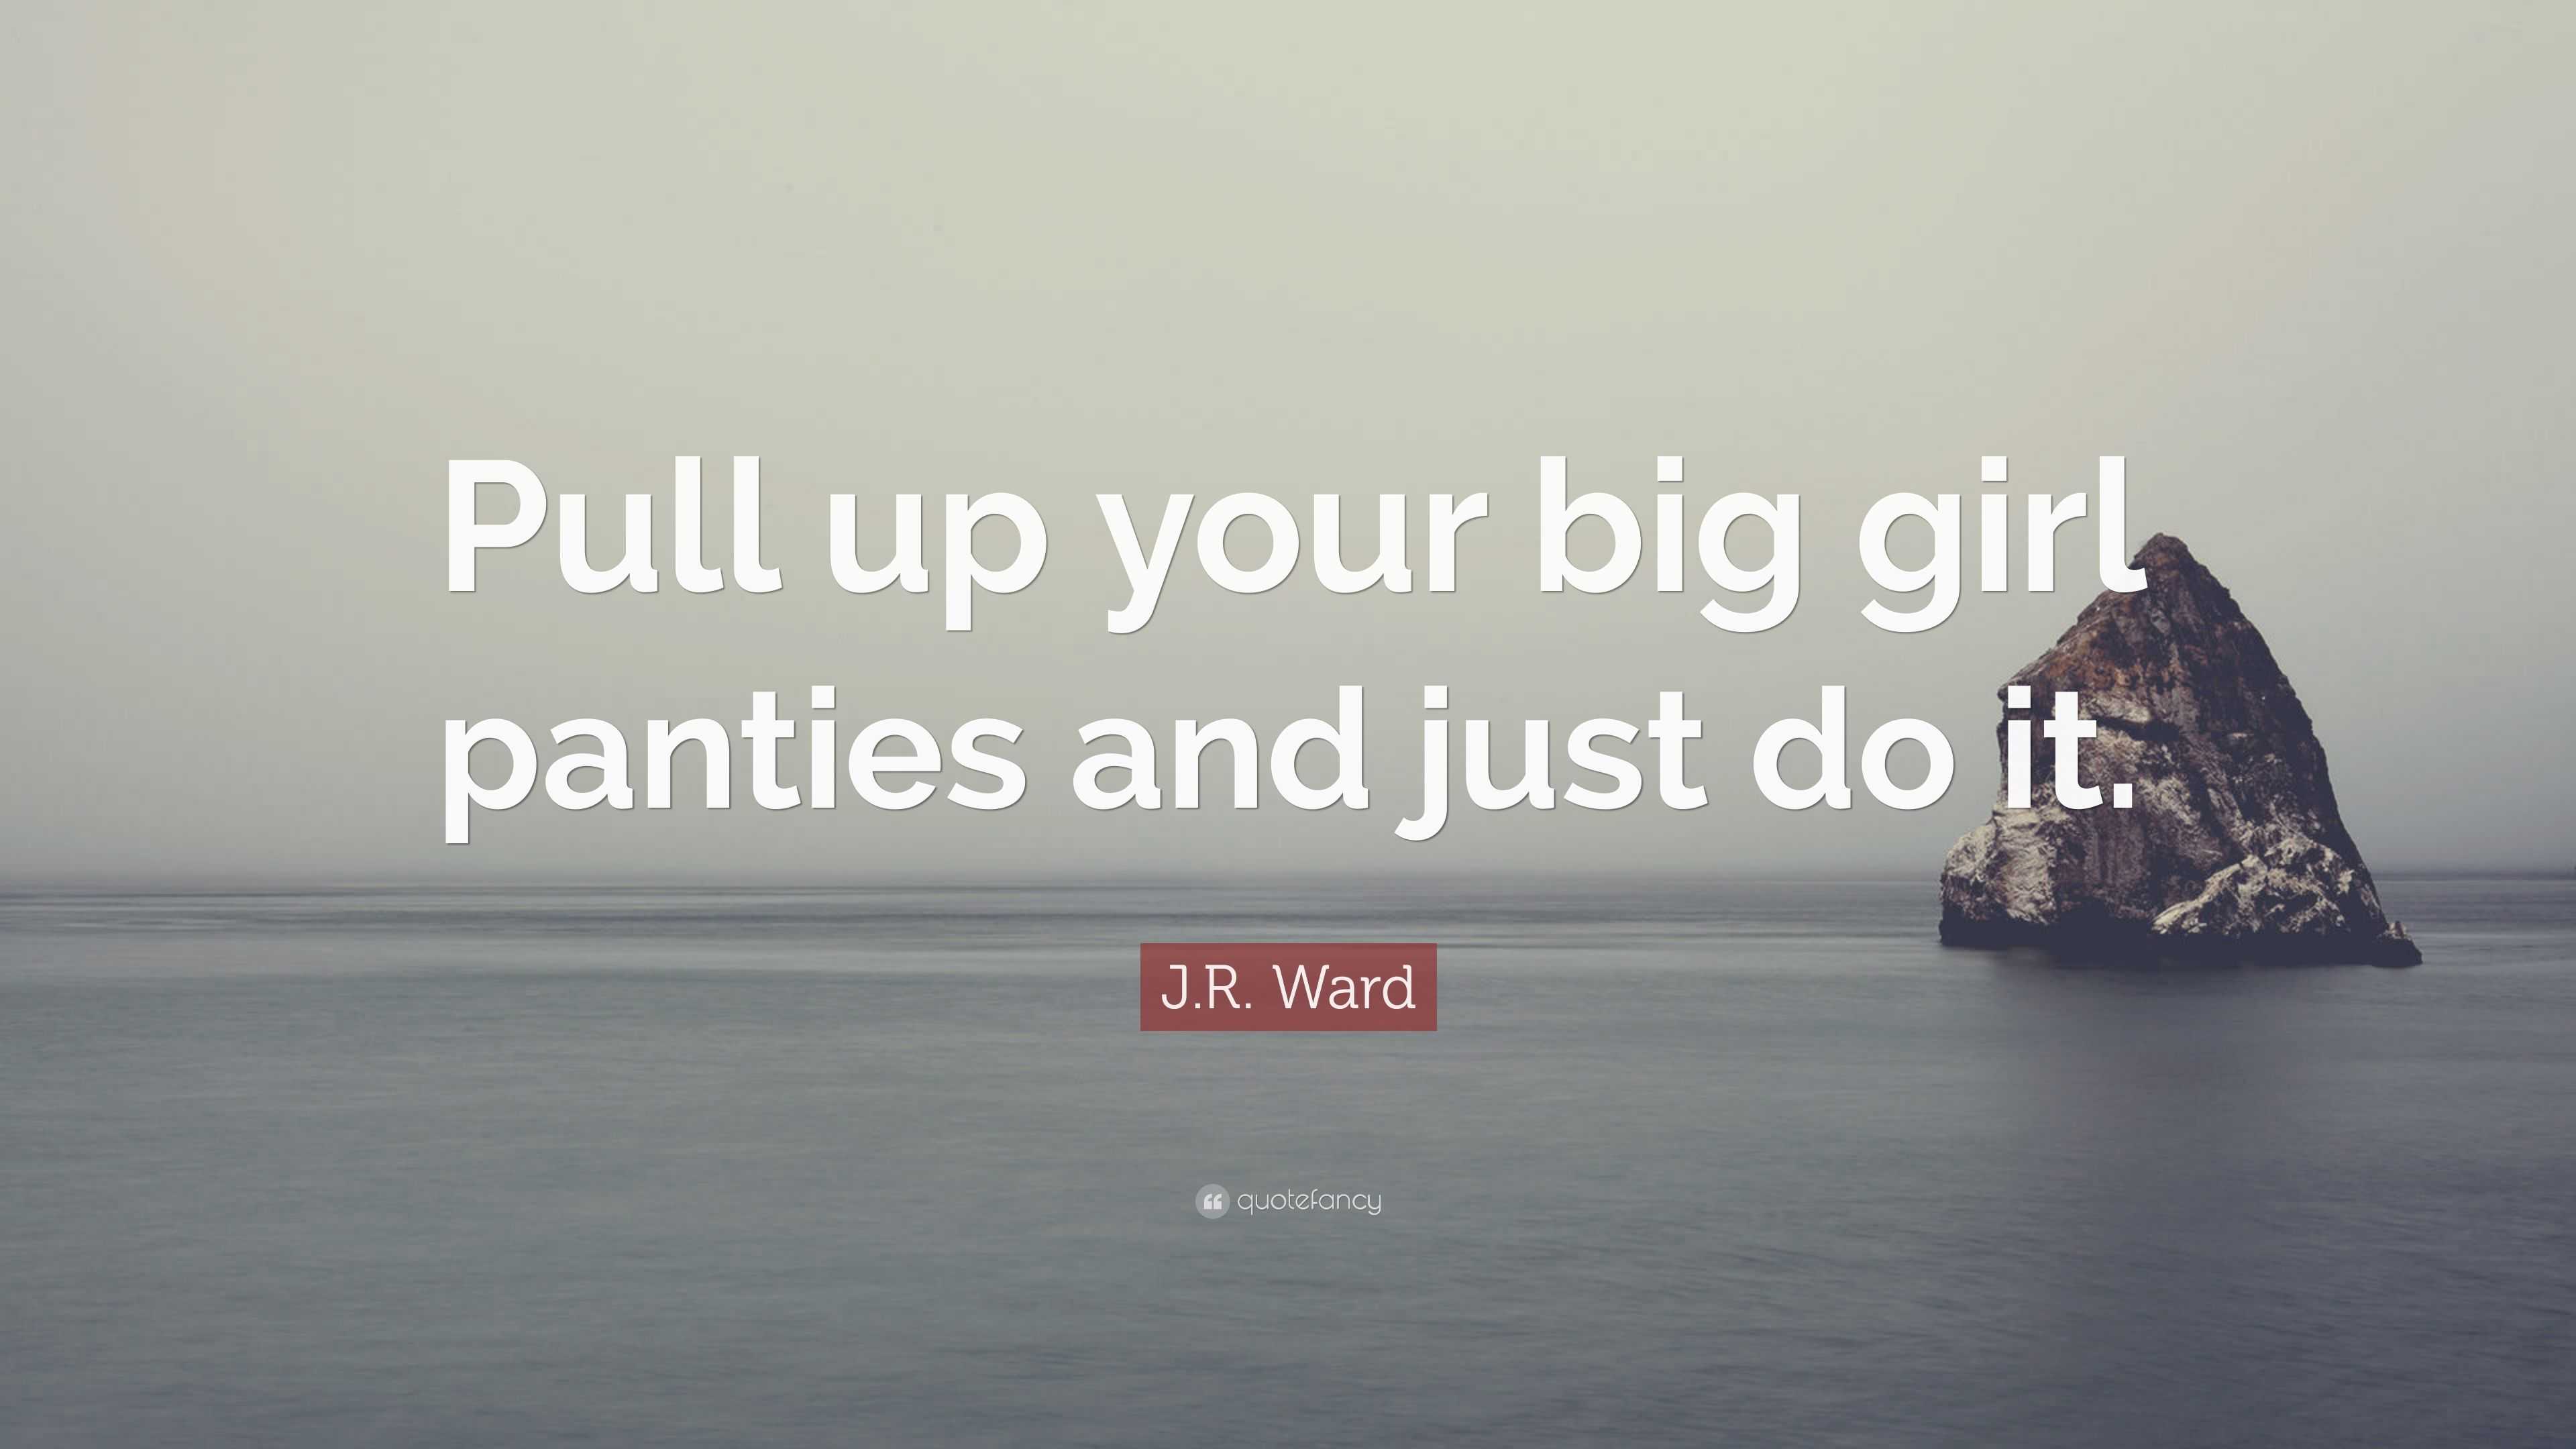 J.R. Ward Quote: “Pull up your big girl panties and just do it.”